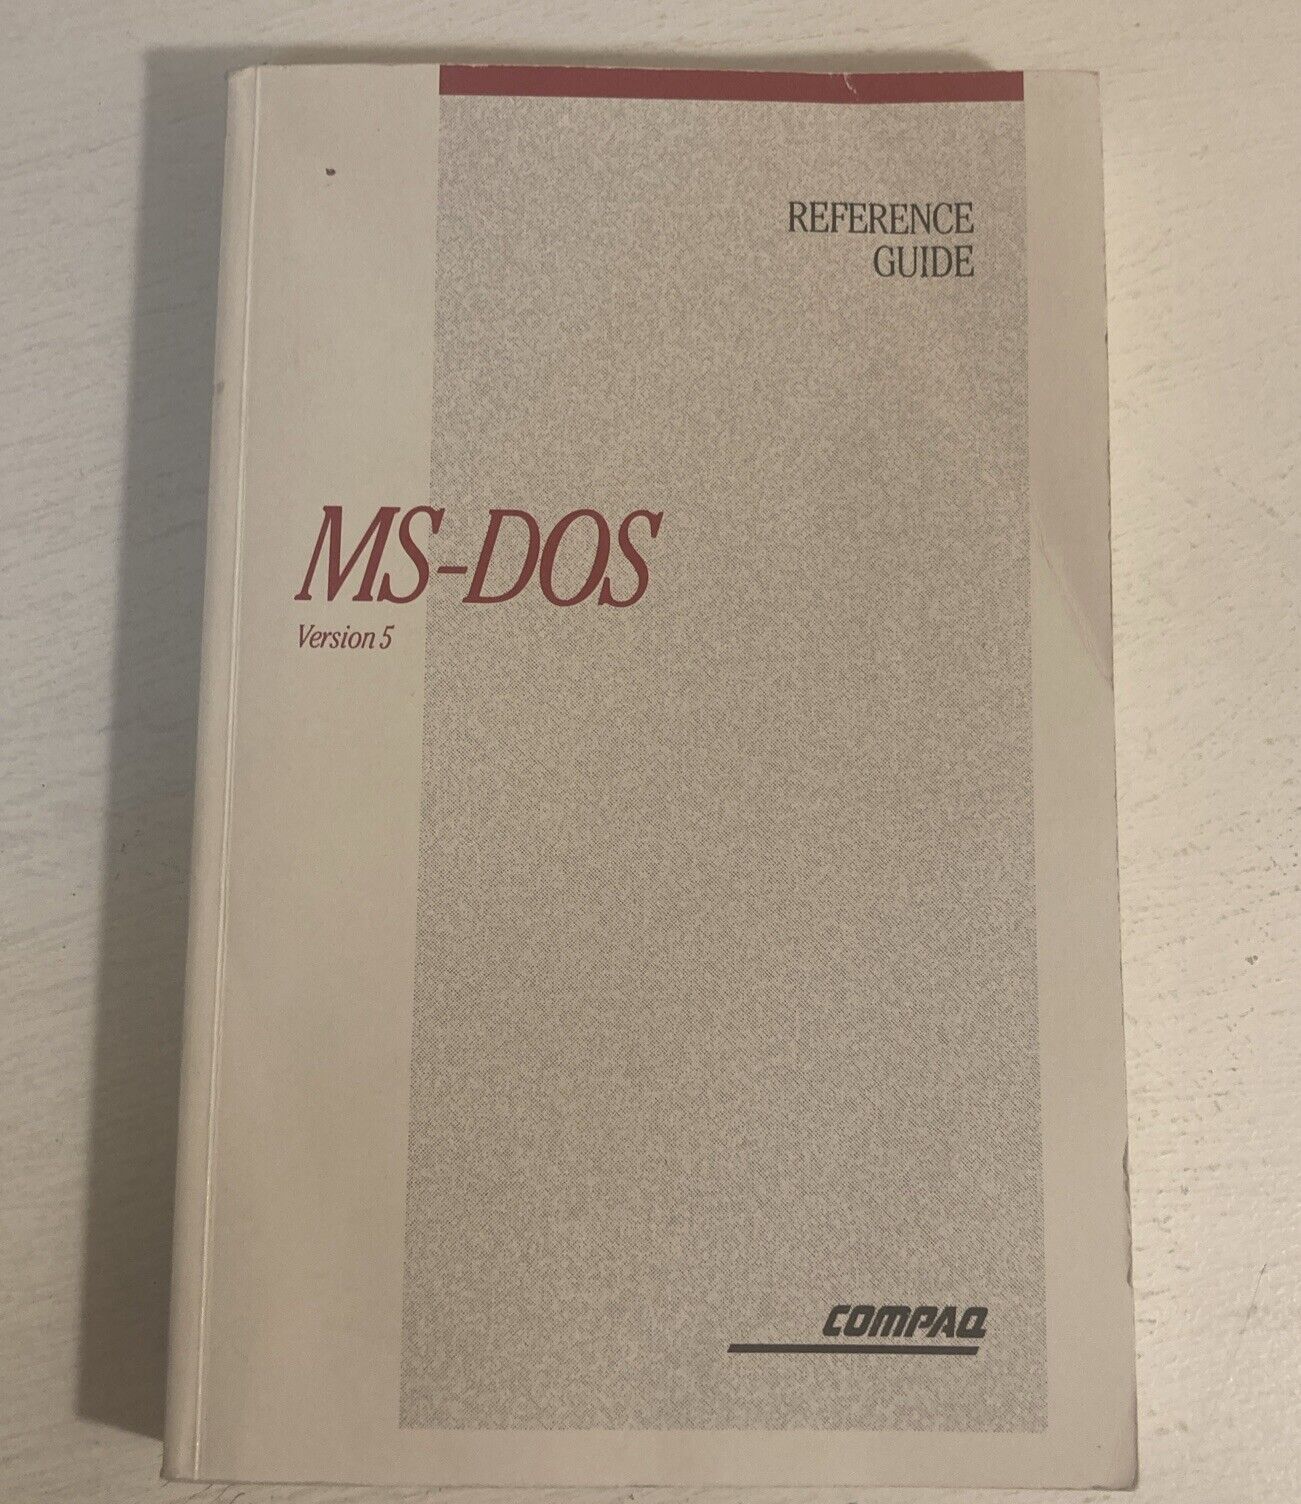 MS-Dos Version 5 Paperback Textbook Refrence Guide 1992 Compaq Industry